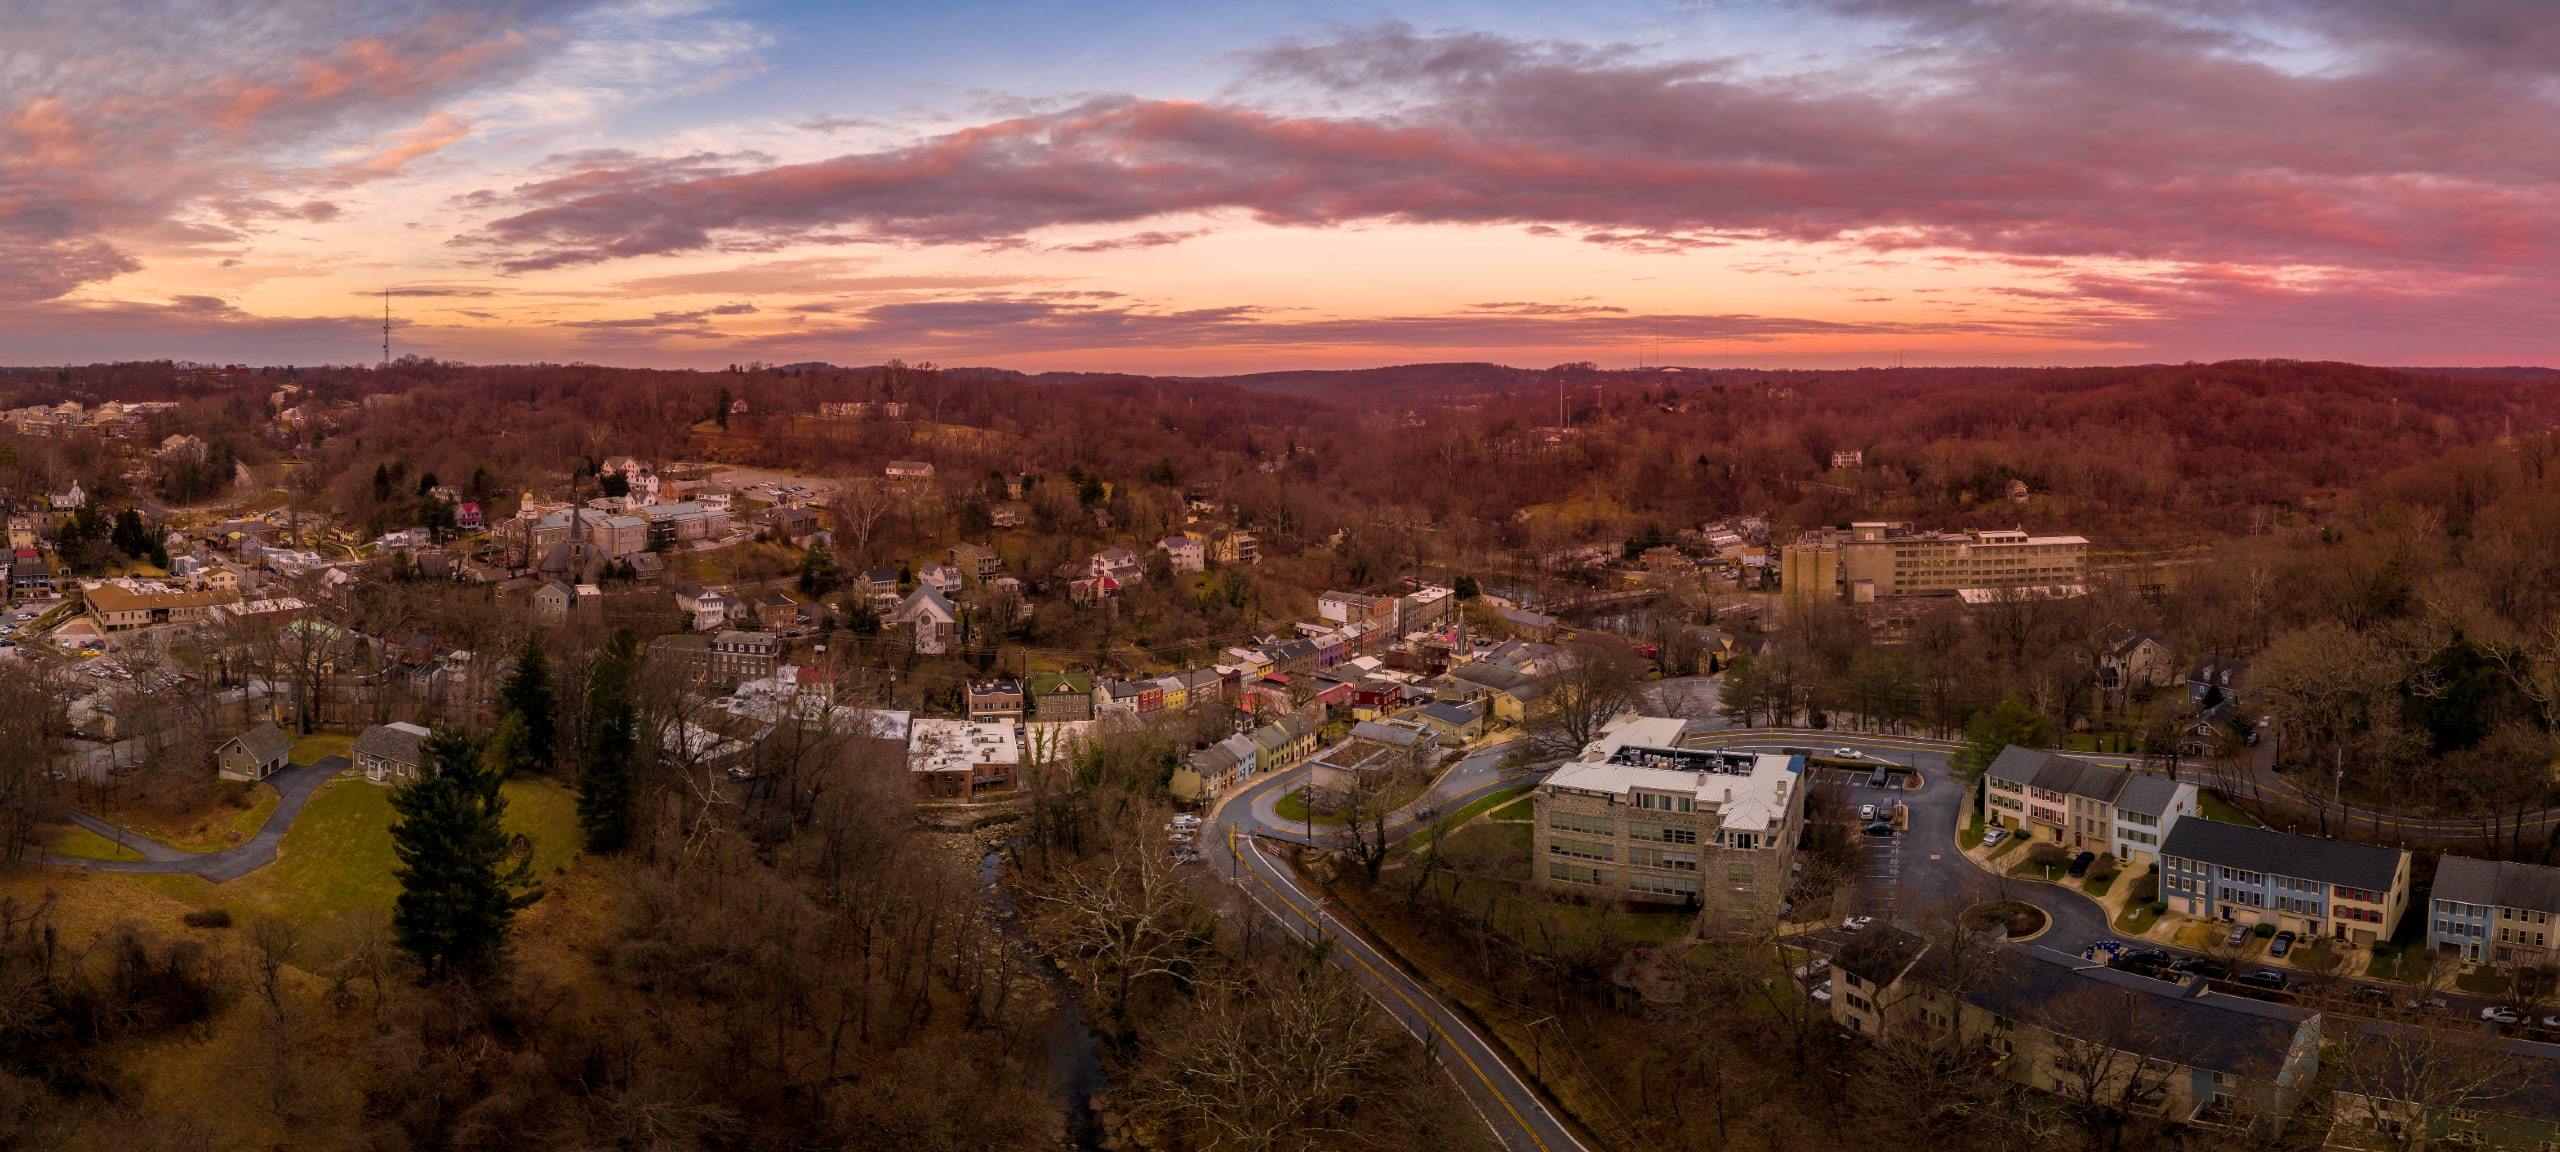 Aerial view of historic Ellicott City during sunset